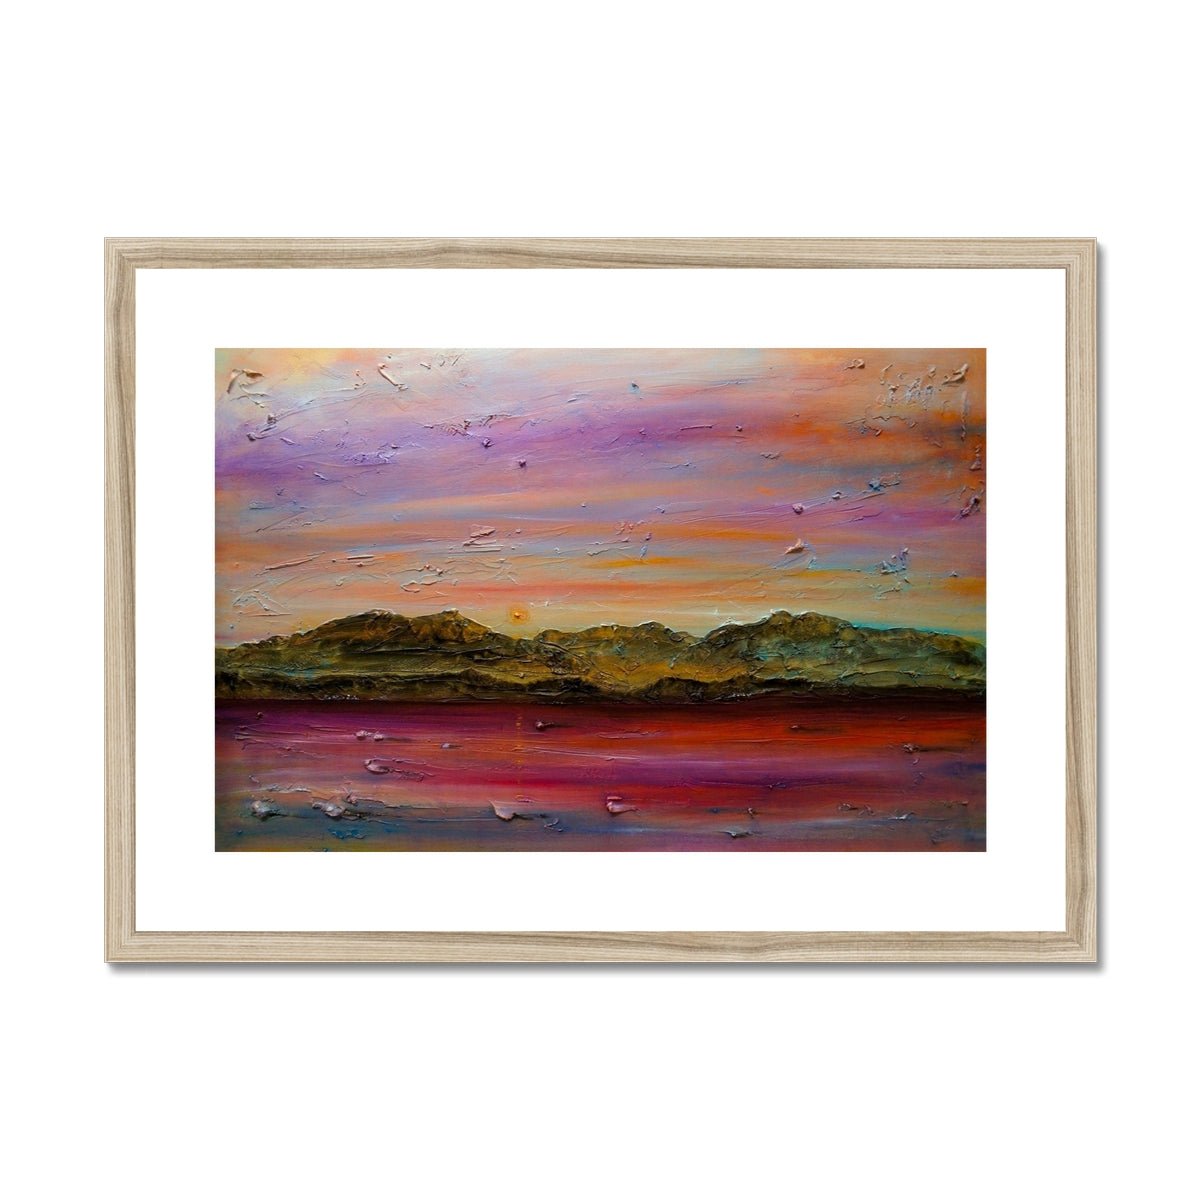 Arran Autumn Dusk Painting | Framed & Mounted Prints From Scotland-Framed & Mounted Prints-Arran Art Gallery-A2 Landscape-Natural Frame-Paintings, Prints, Homeware, Art Gifts From Scotland By Scottish Artist Kevin Hunter